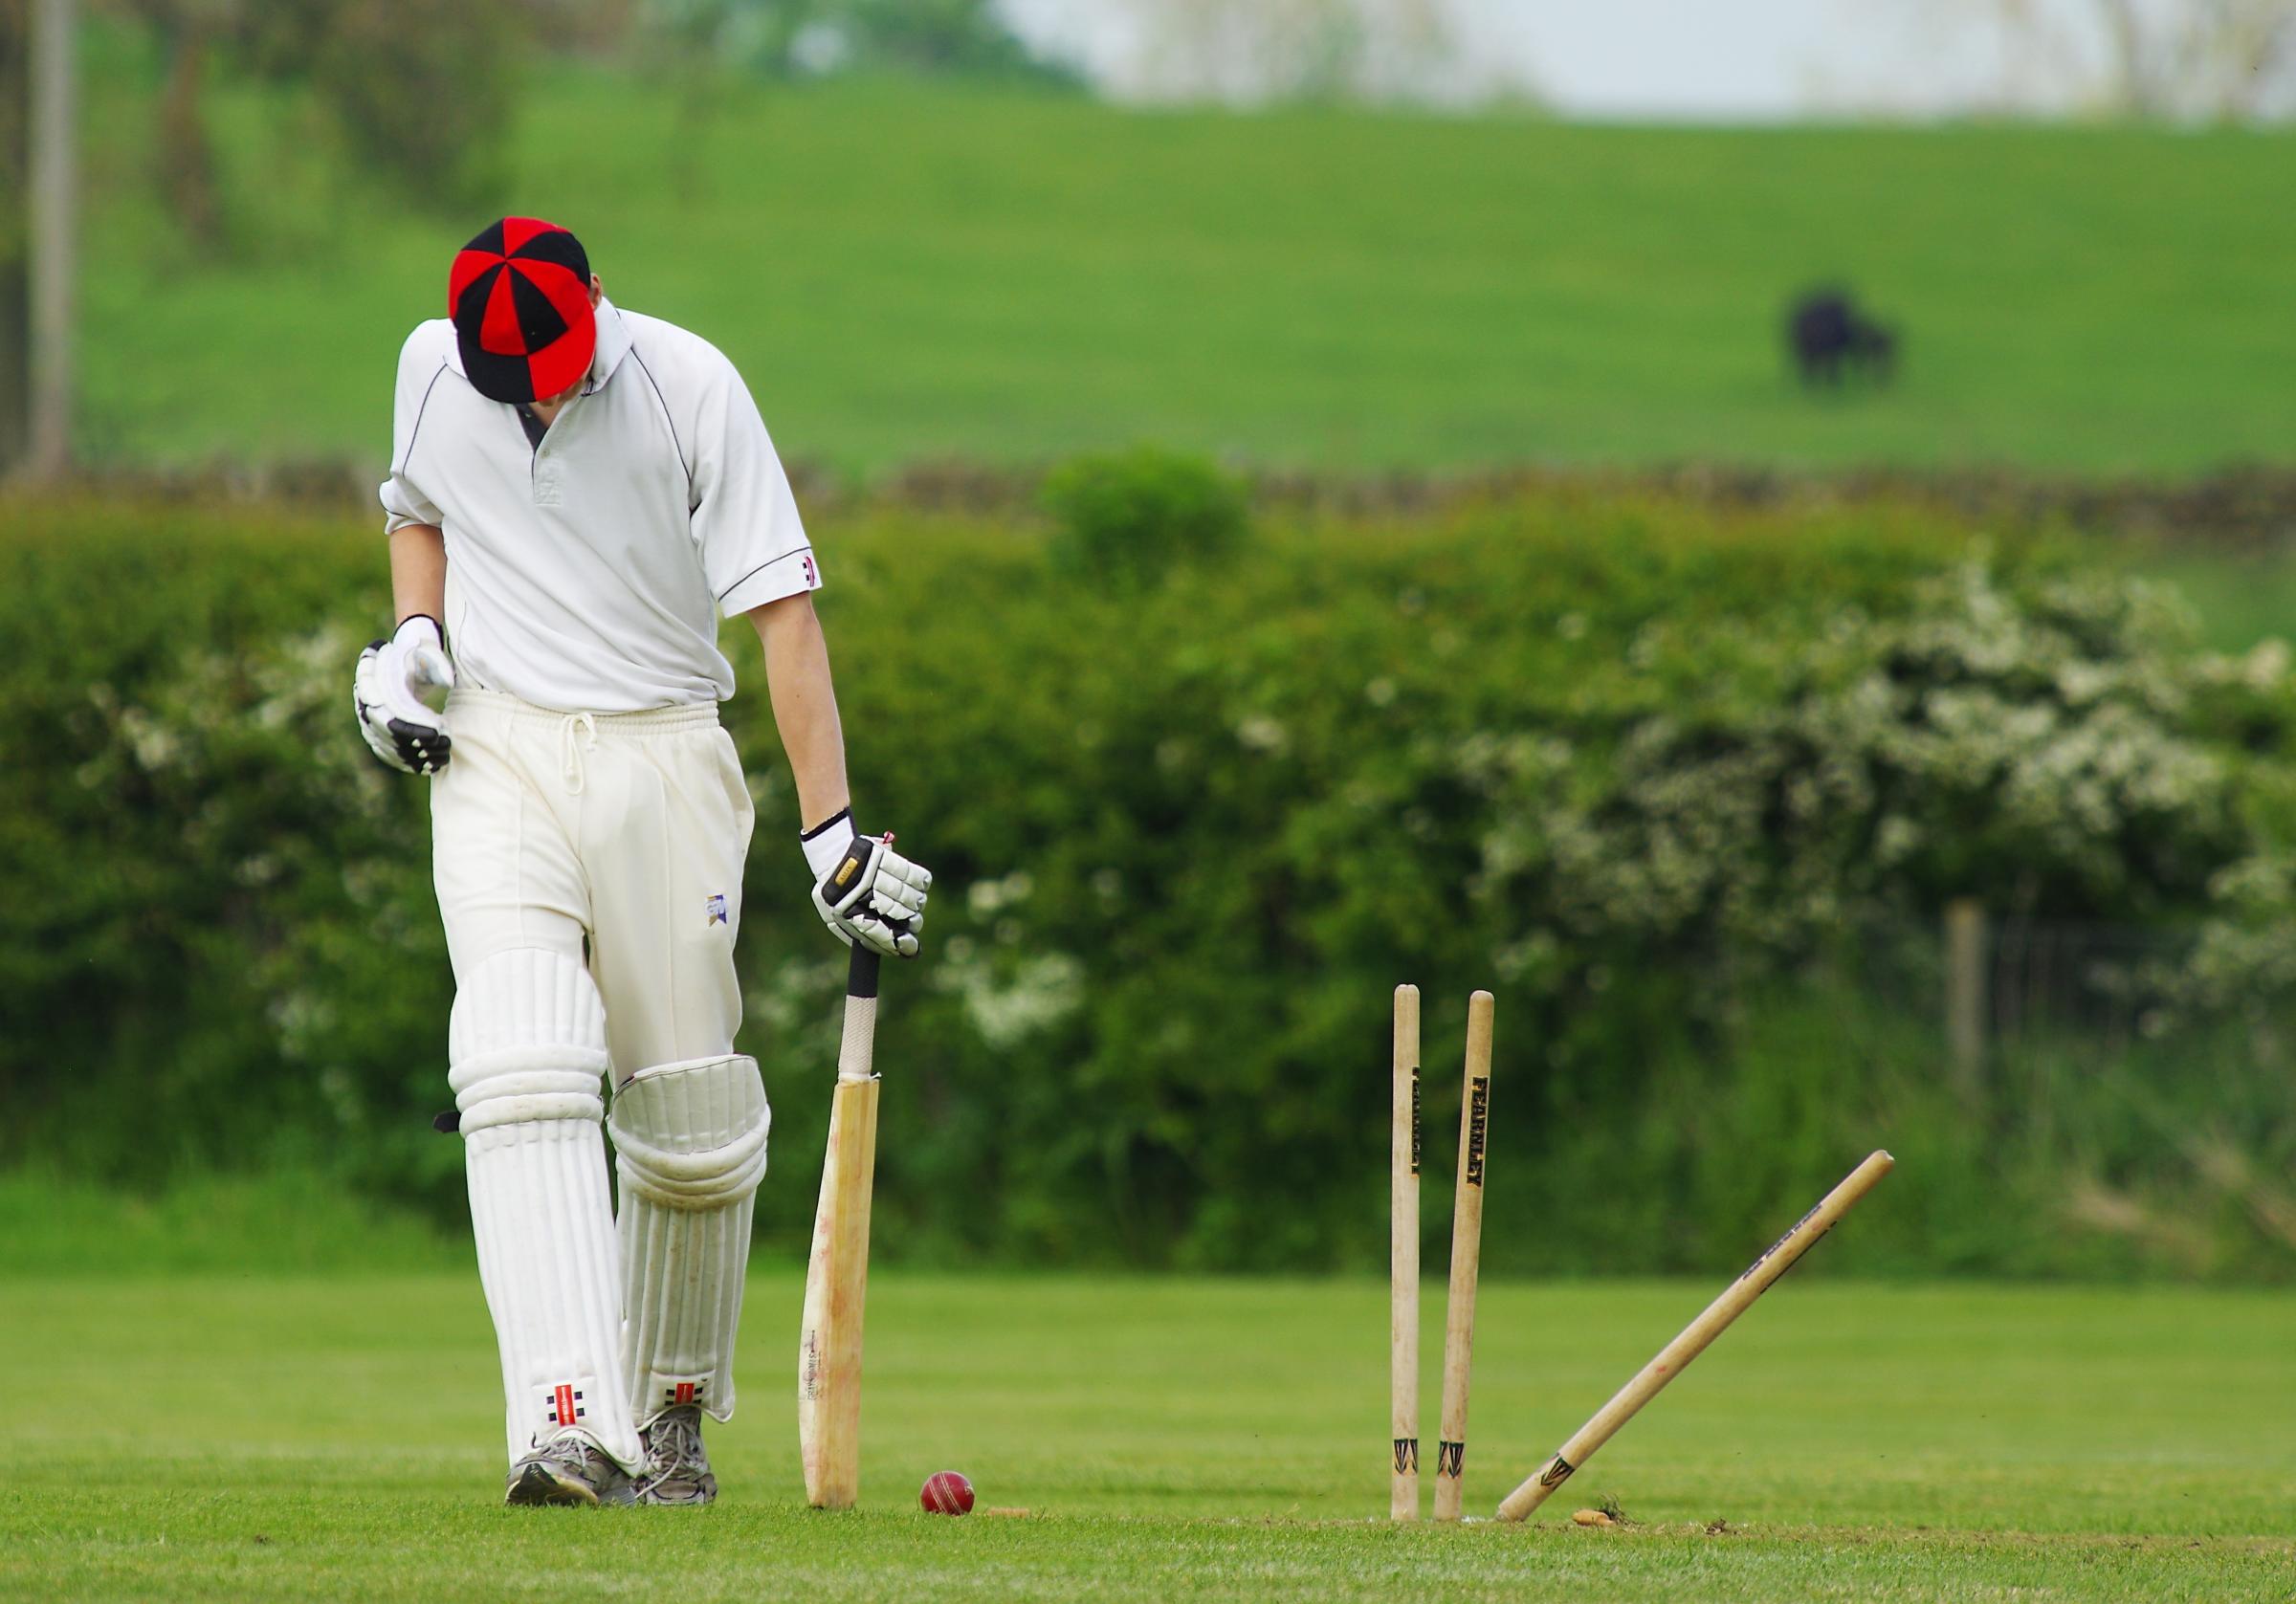 A batsman leaves the crease after being bowled out. Photo: Pixabay